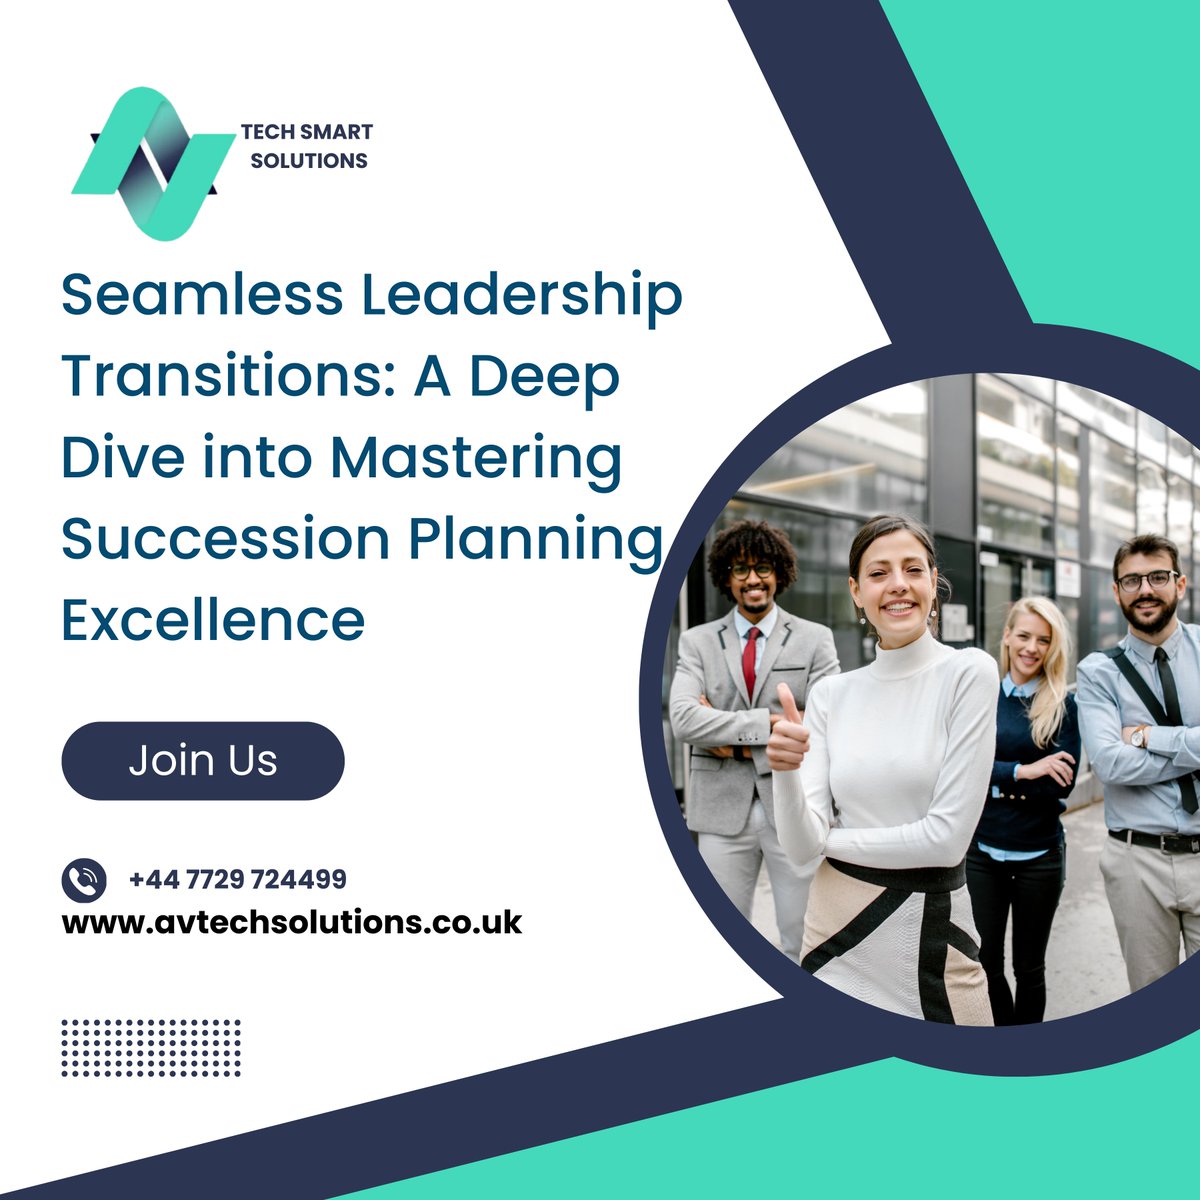 Succession planning is the strategic process of identifying, developing, and transitioning internal talent for key leadership roles, ensuring seamless organizational continuity.
📞 Contact us at +44 7729 724499
🌐 Learn more at : avtechsolutions.co.uk/seamless-leade…
#LeadershipTransitions